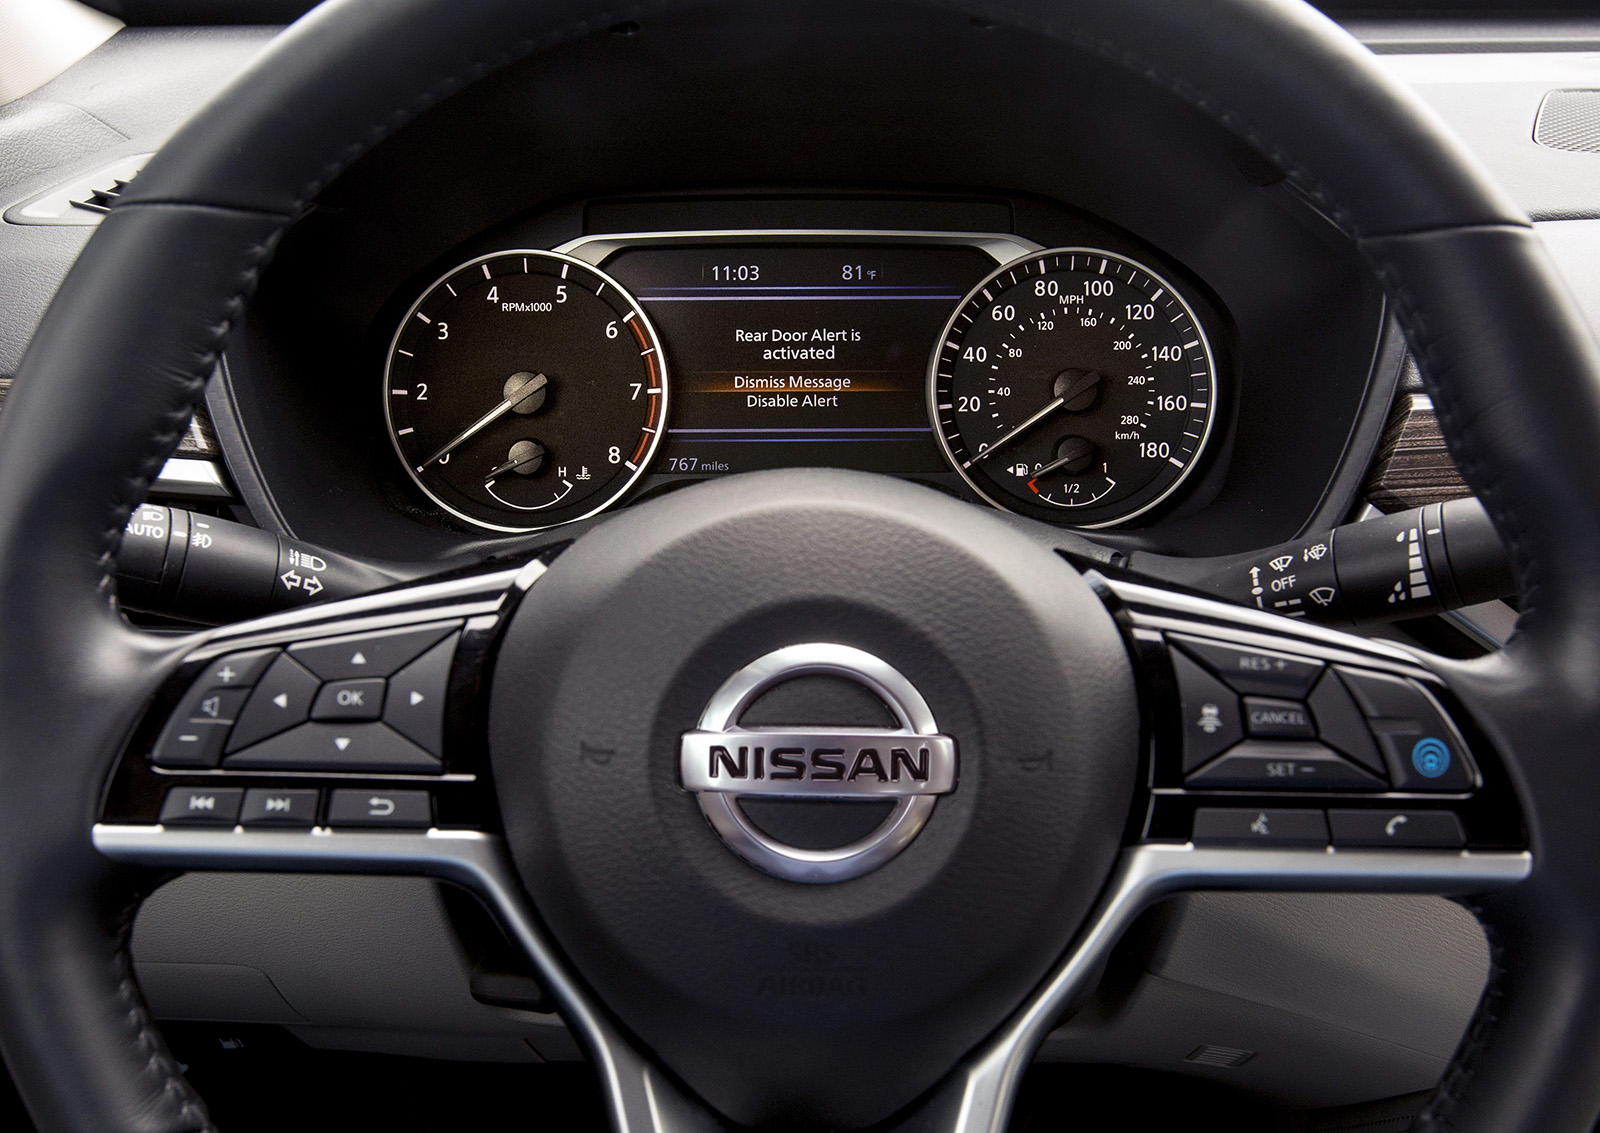 nissan wants no child or pet left behind in a hot car with rear door alert